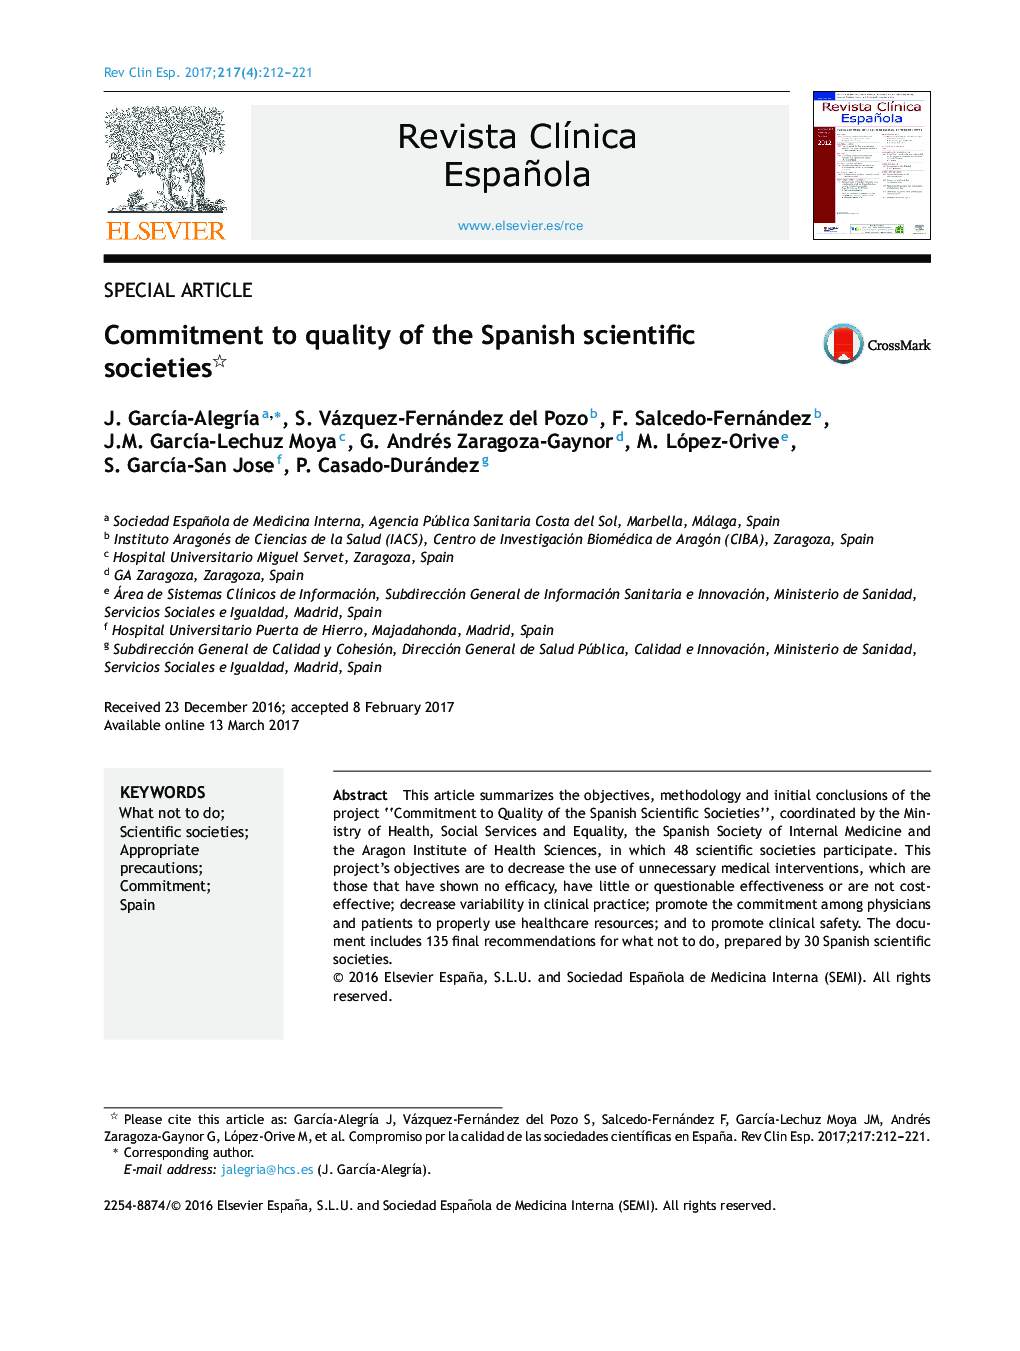 Commitment to quality of the Spanish scientific societies